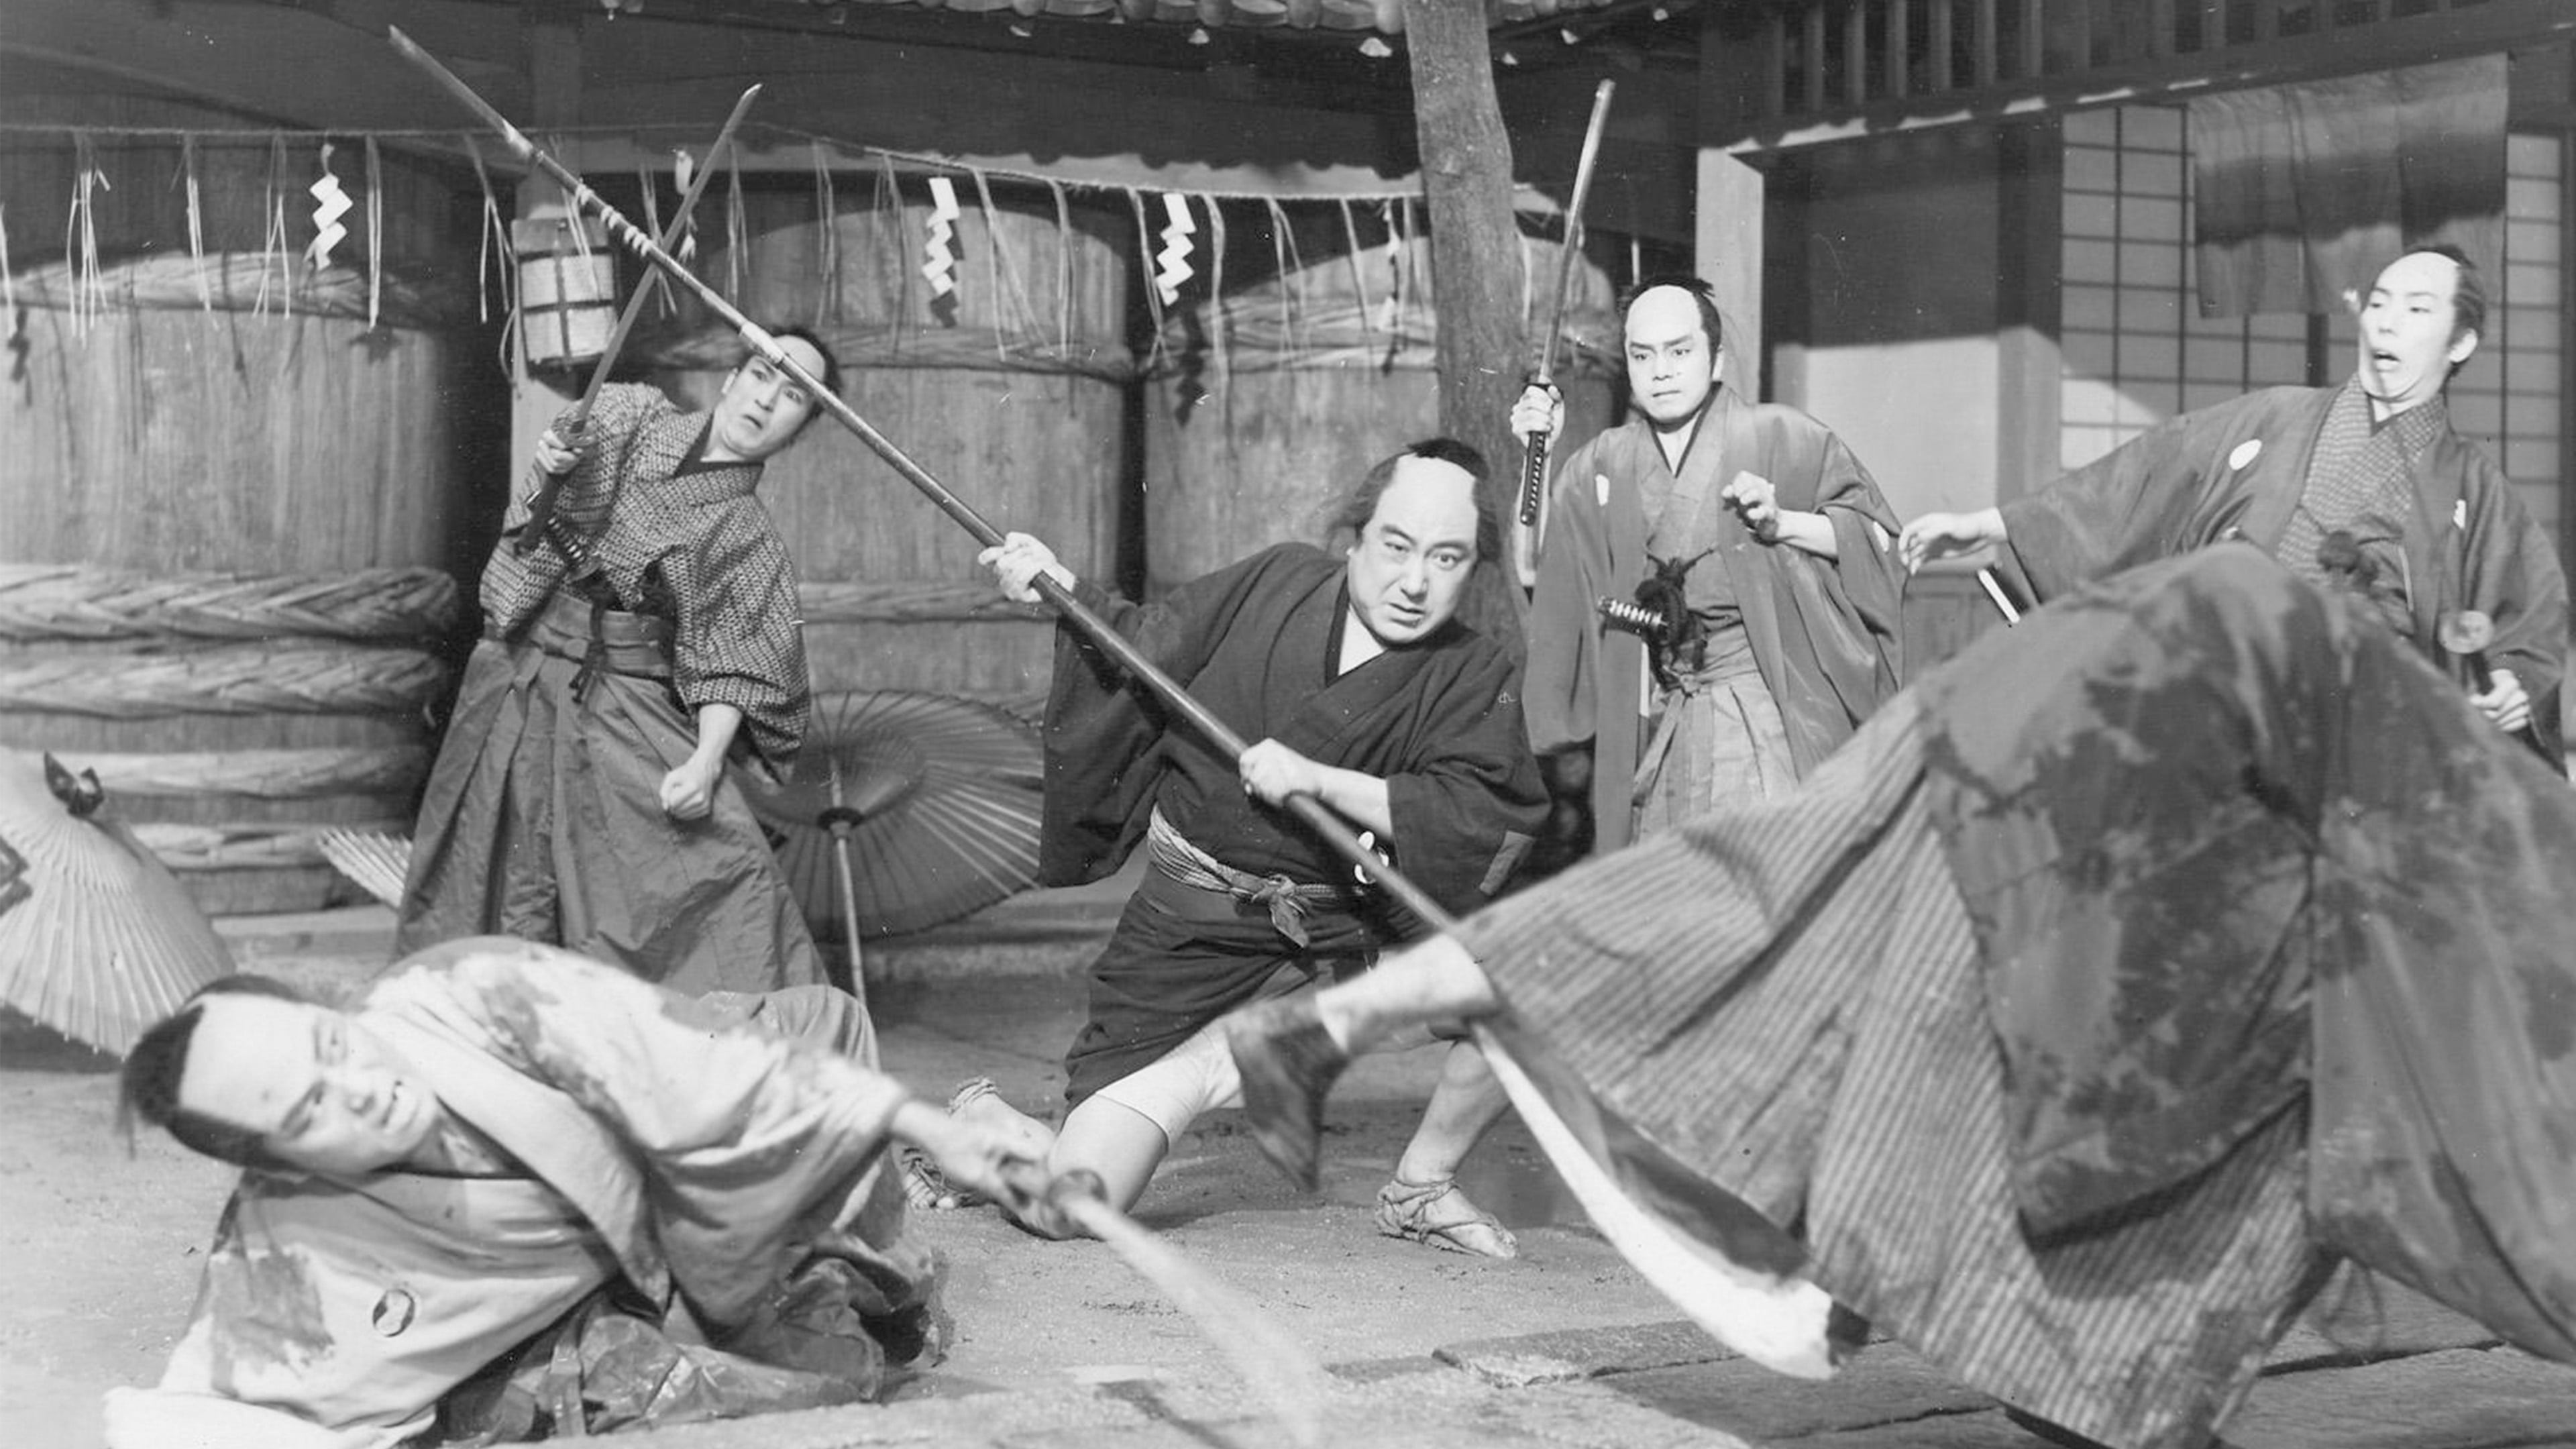 Bloody Spear at Mount Fuji 1955 123movies